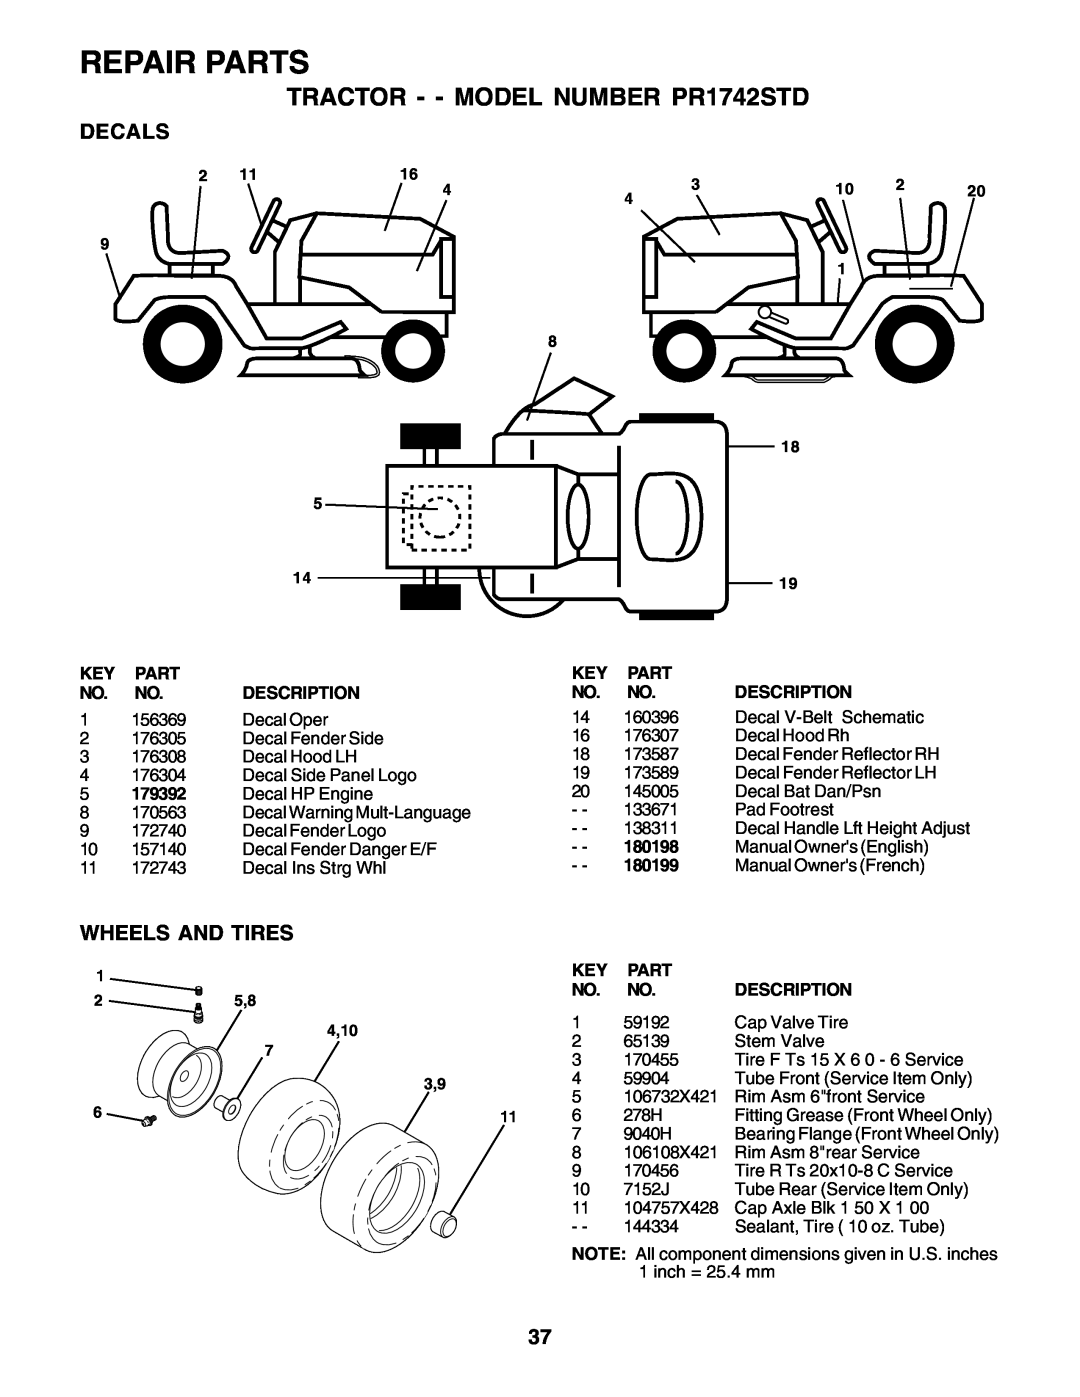 Poulan 180198 Decals, Wheels And Tires, Repair Parts, TRACTOR - - MODEL NUMBER PR1742STD, Bearing Flange Front Wheel Only 